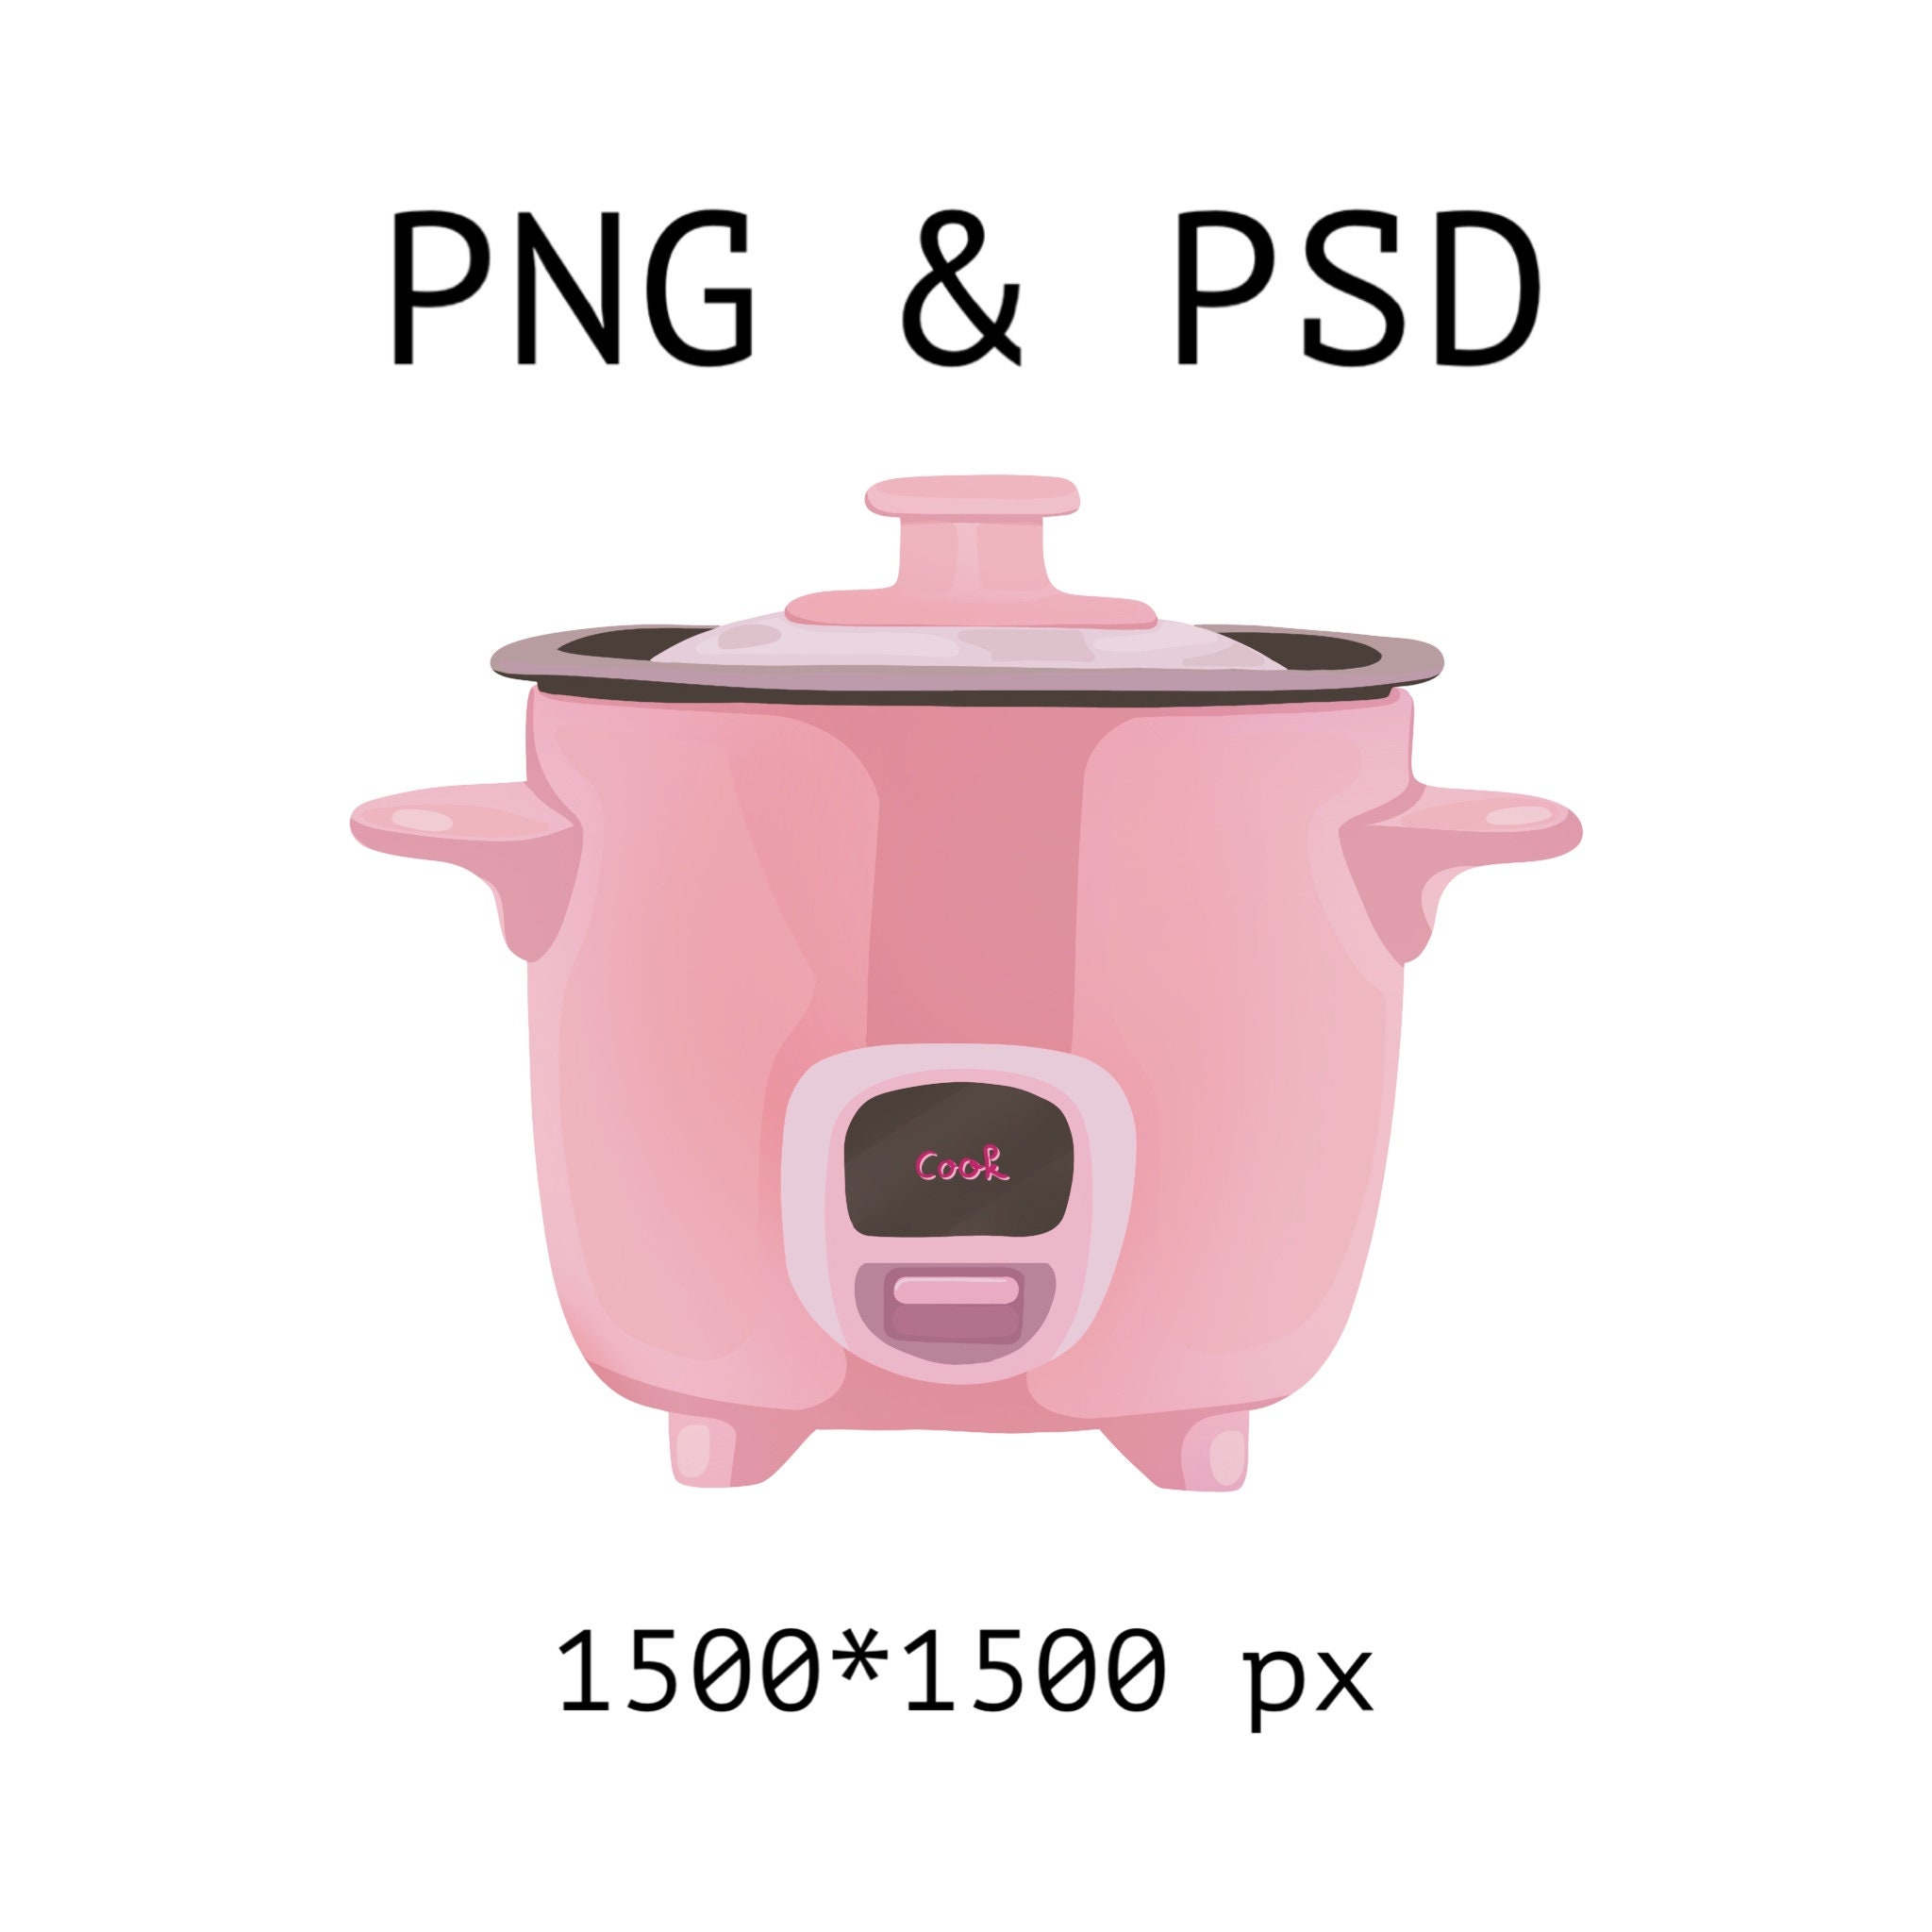 BELLA 13746 Dots Collection Slow Cooker, 6-Quart, Pink  Pink kitchen, Pink  kitchen appliances, Kitchen must haves